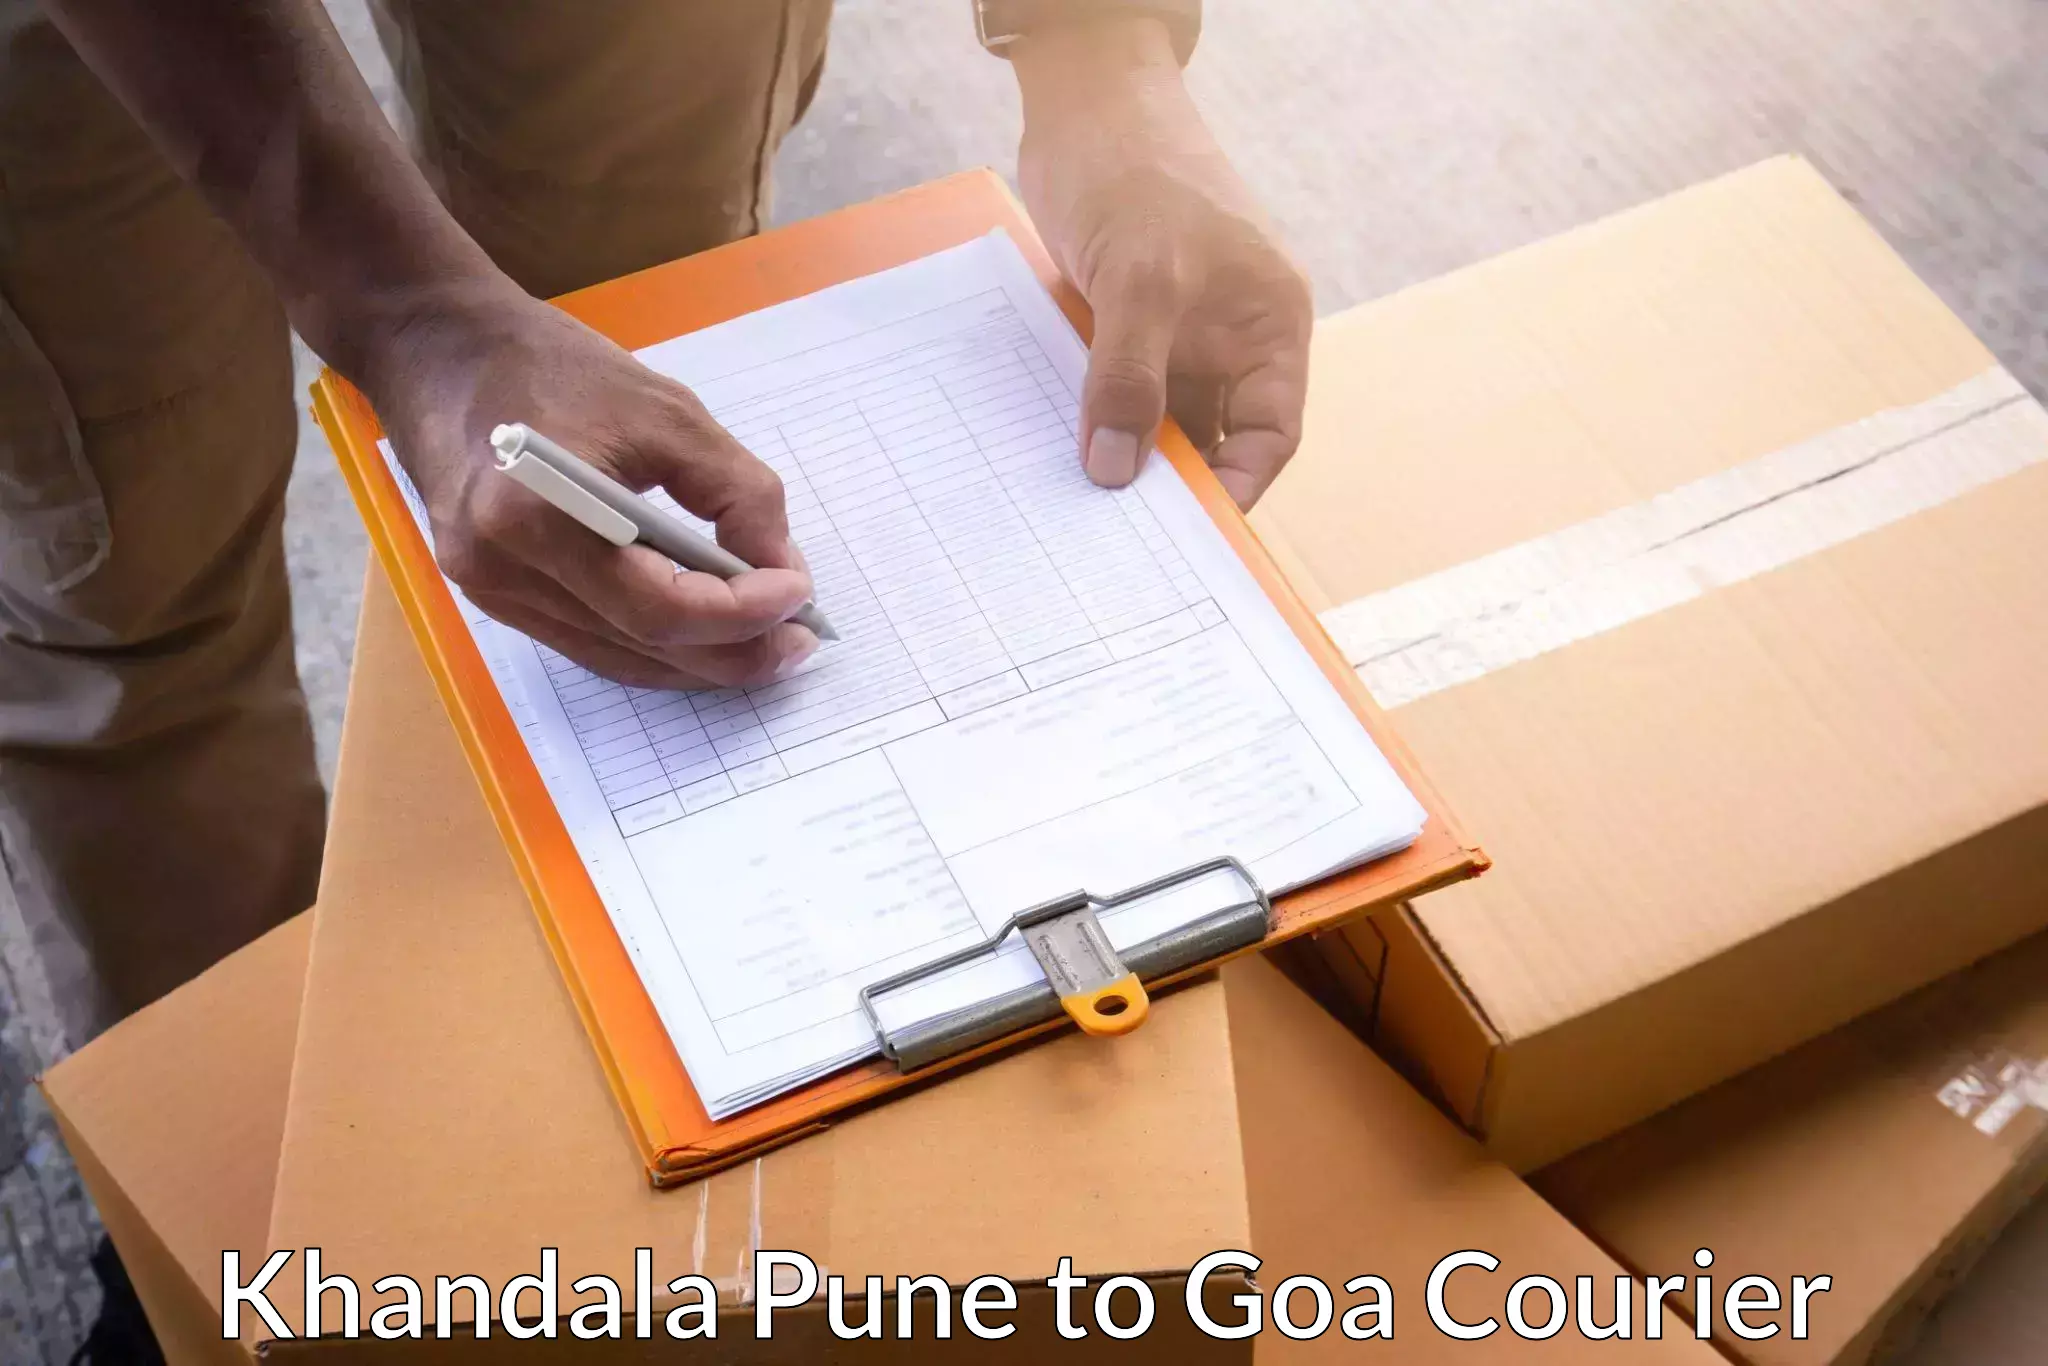 Medical delivery services in Khandala Pune to Goa